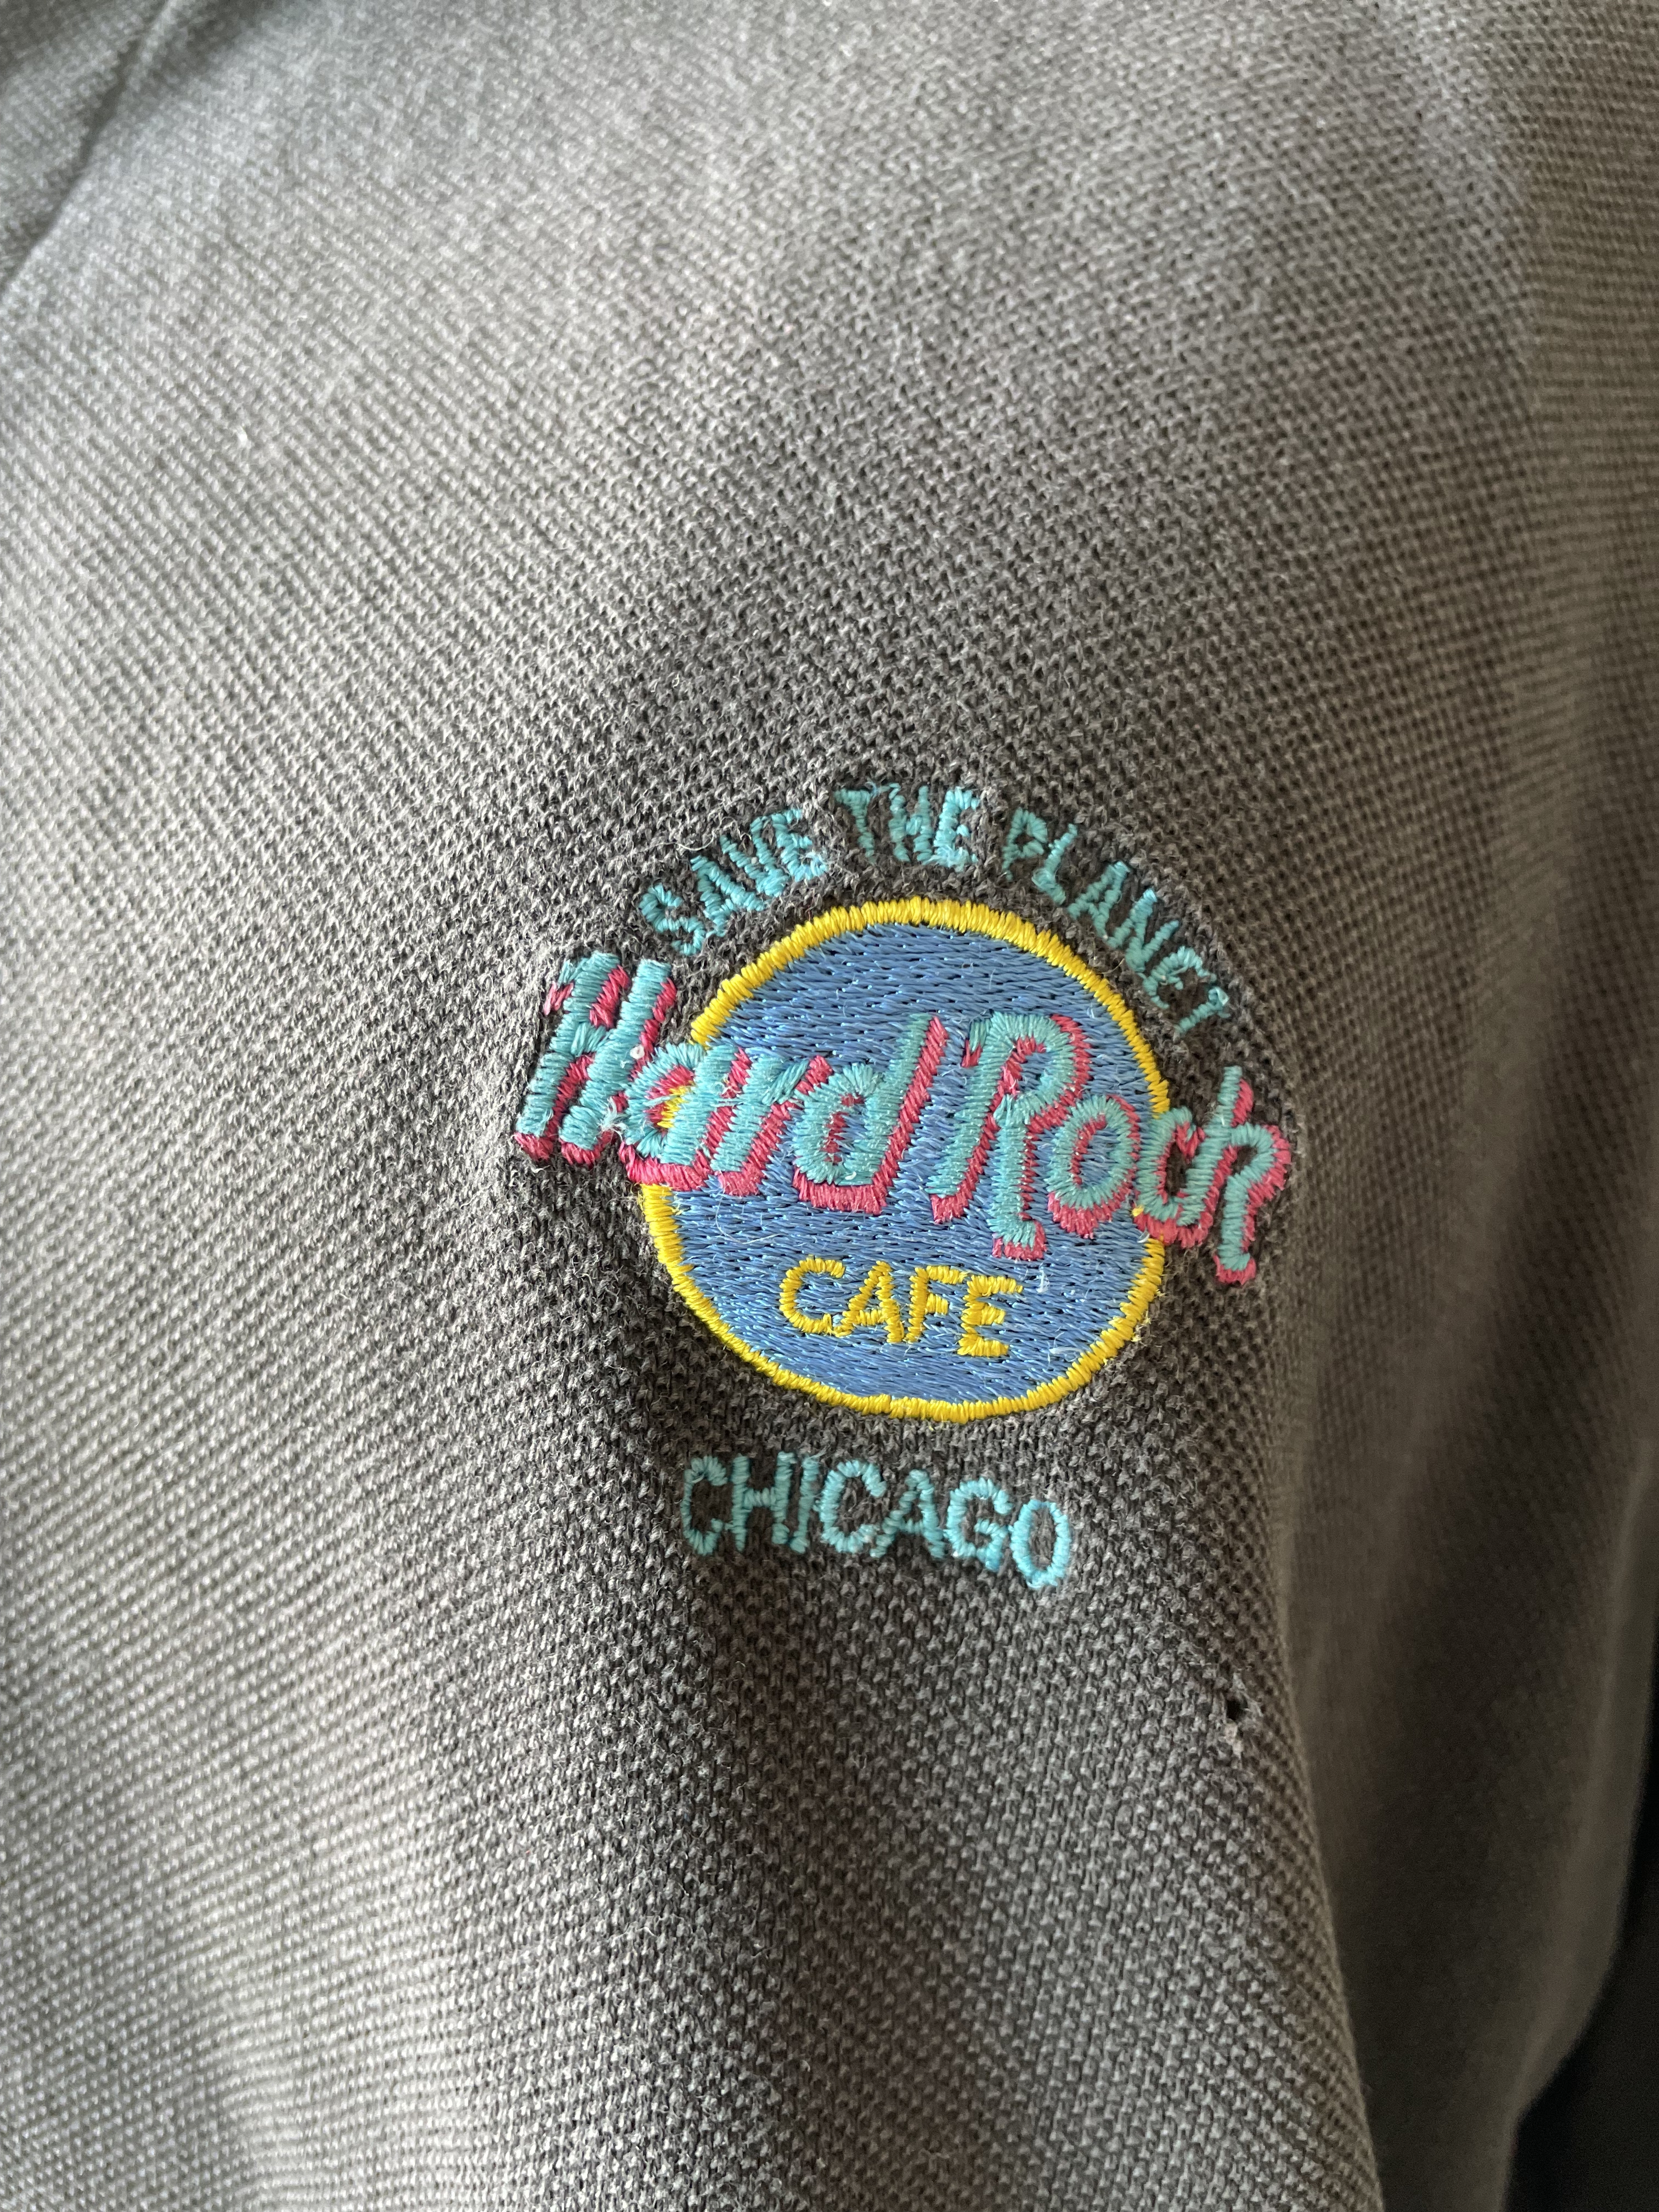 usa製　hard rock cafe ハードロックカフェ　刺繍　シカゴ